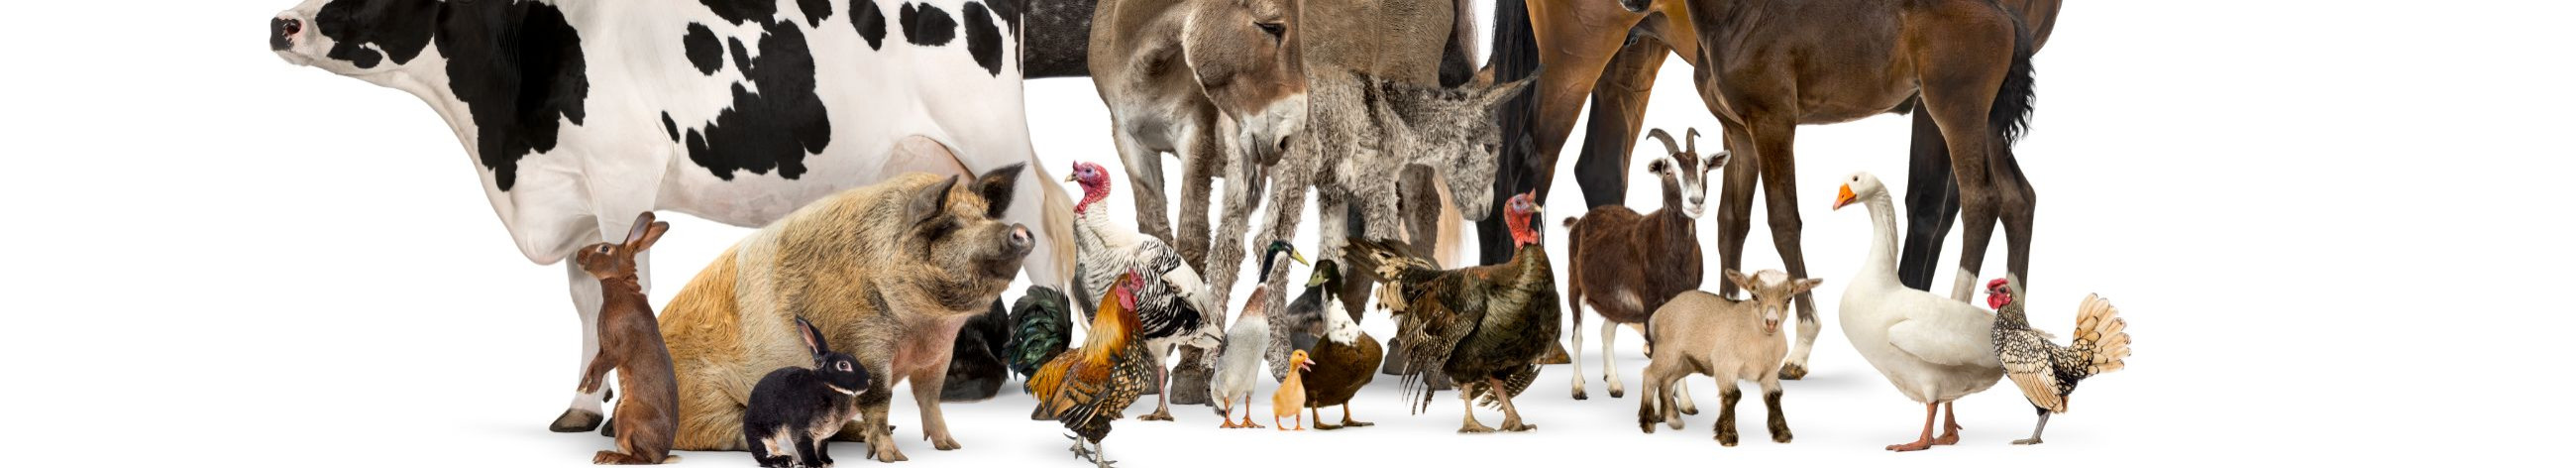 feed additives for farm animals and birds, oral solutions for farm animals and birds, profivet products, for cows, cattle, calves, for pigs, feed additives for sheep, feed additives for goats, feed additives for farm animals, oral solutions for livestock, profivet animal care products